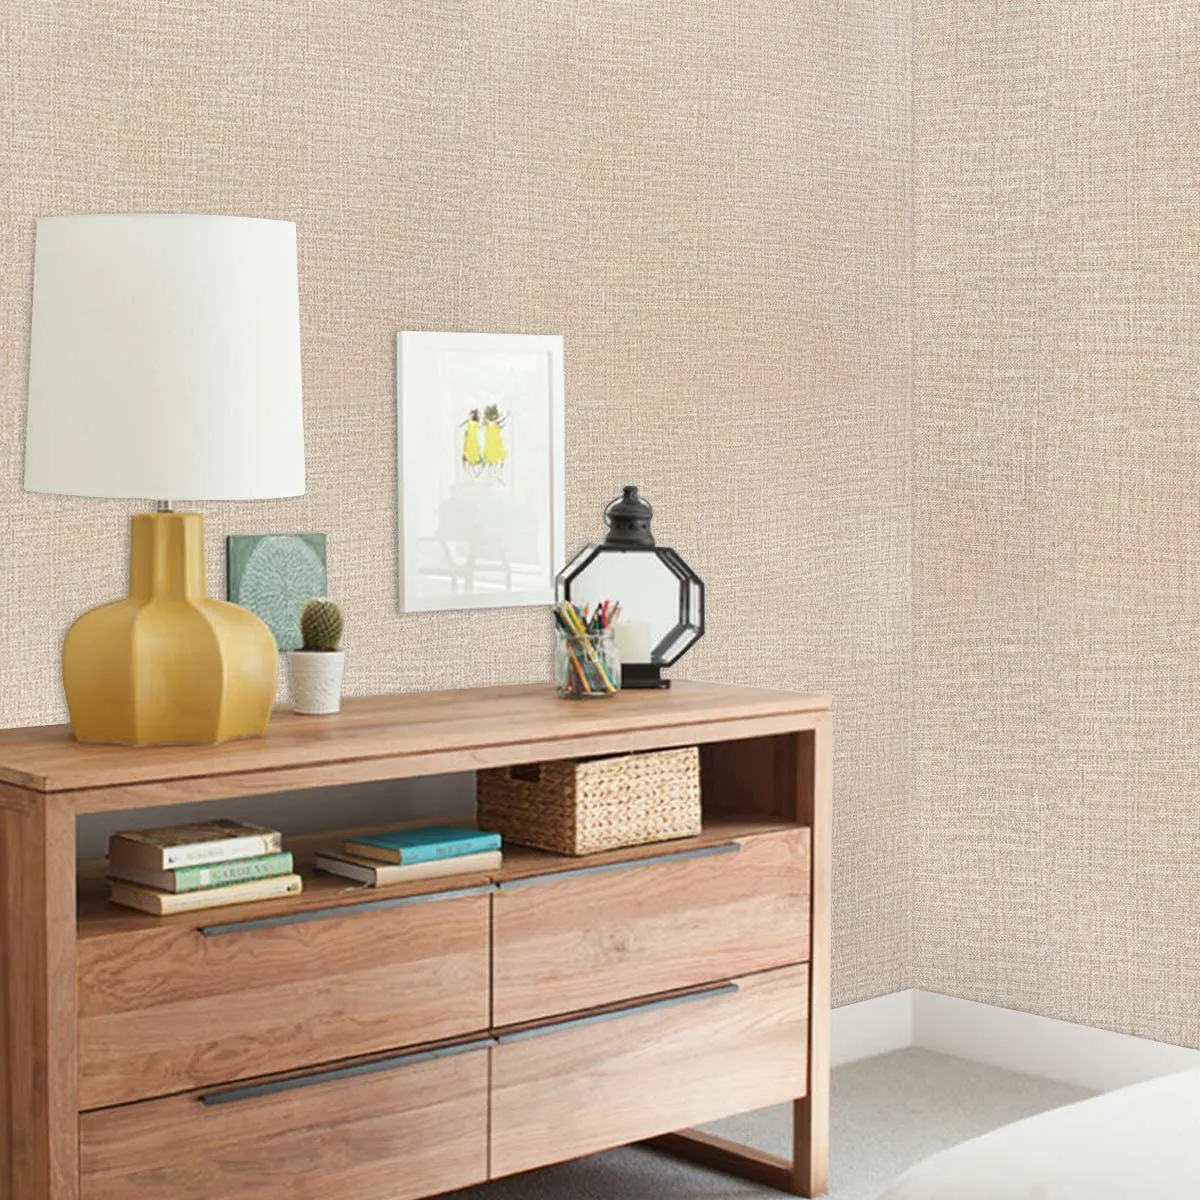 Faux Linen Textured Wallpaper Removable Self Adhesive Stick Contact Paper  Wall Door For Accent Wall Bedroom New | Faux Linen Textured Wallpaper  Removable Self Adhesive Stick Contact Paper Wall Door For Accent |